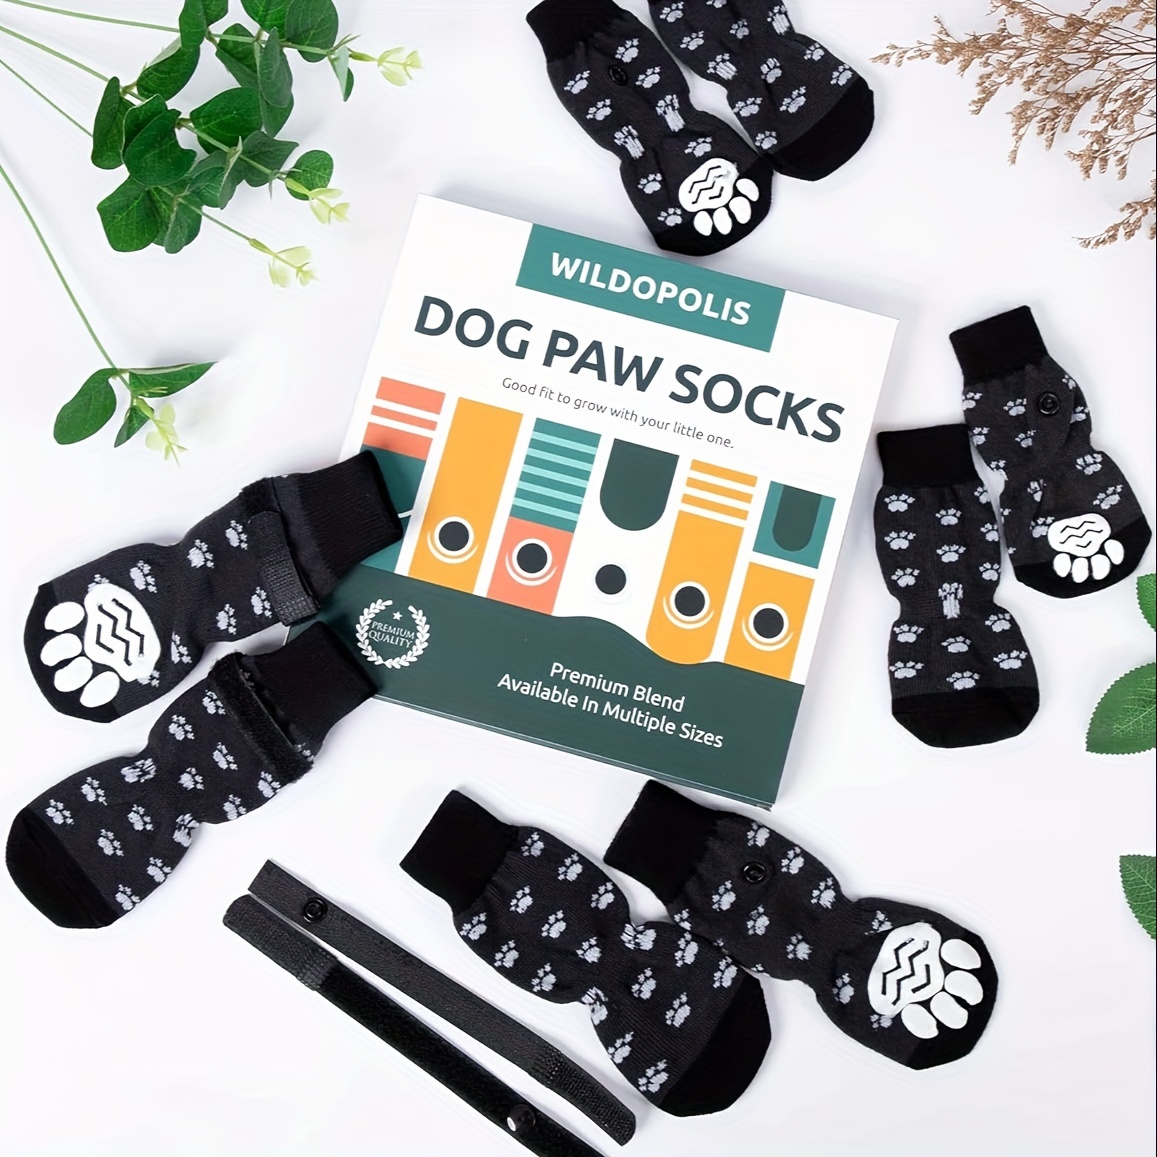 

4 Pairs Of Anti-slip Dog Socks With Adjustable Straps: Paw Protector Socks With Strong Sole Grips, Traction Aid To Keep Small Medium Dogs From Slipping On Indoor Hardwood Floors